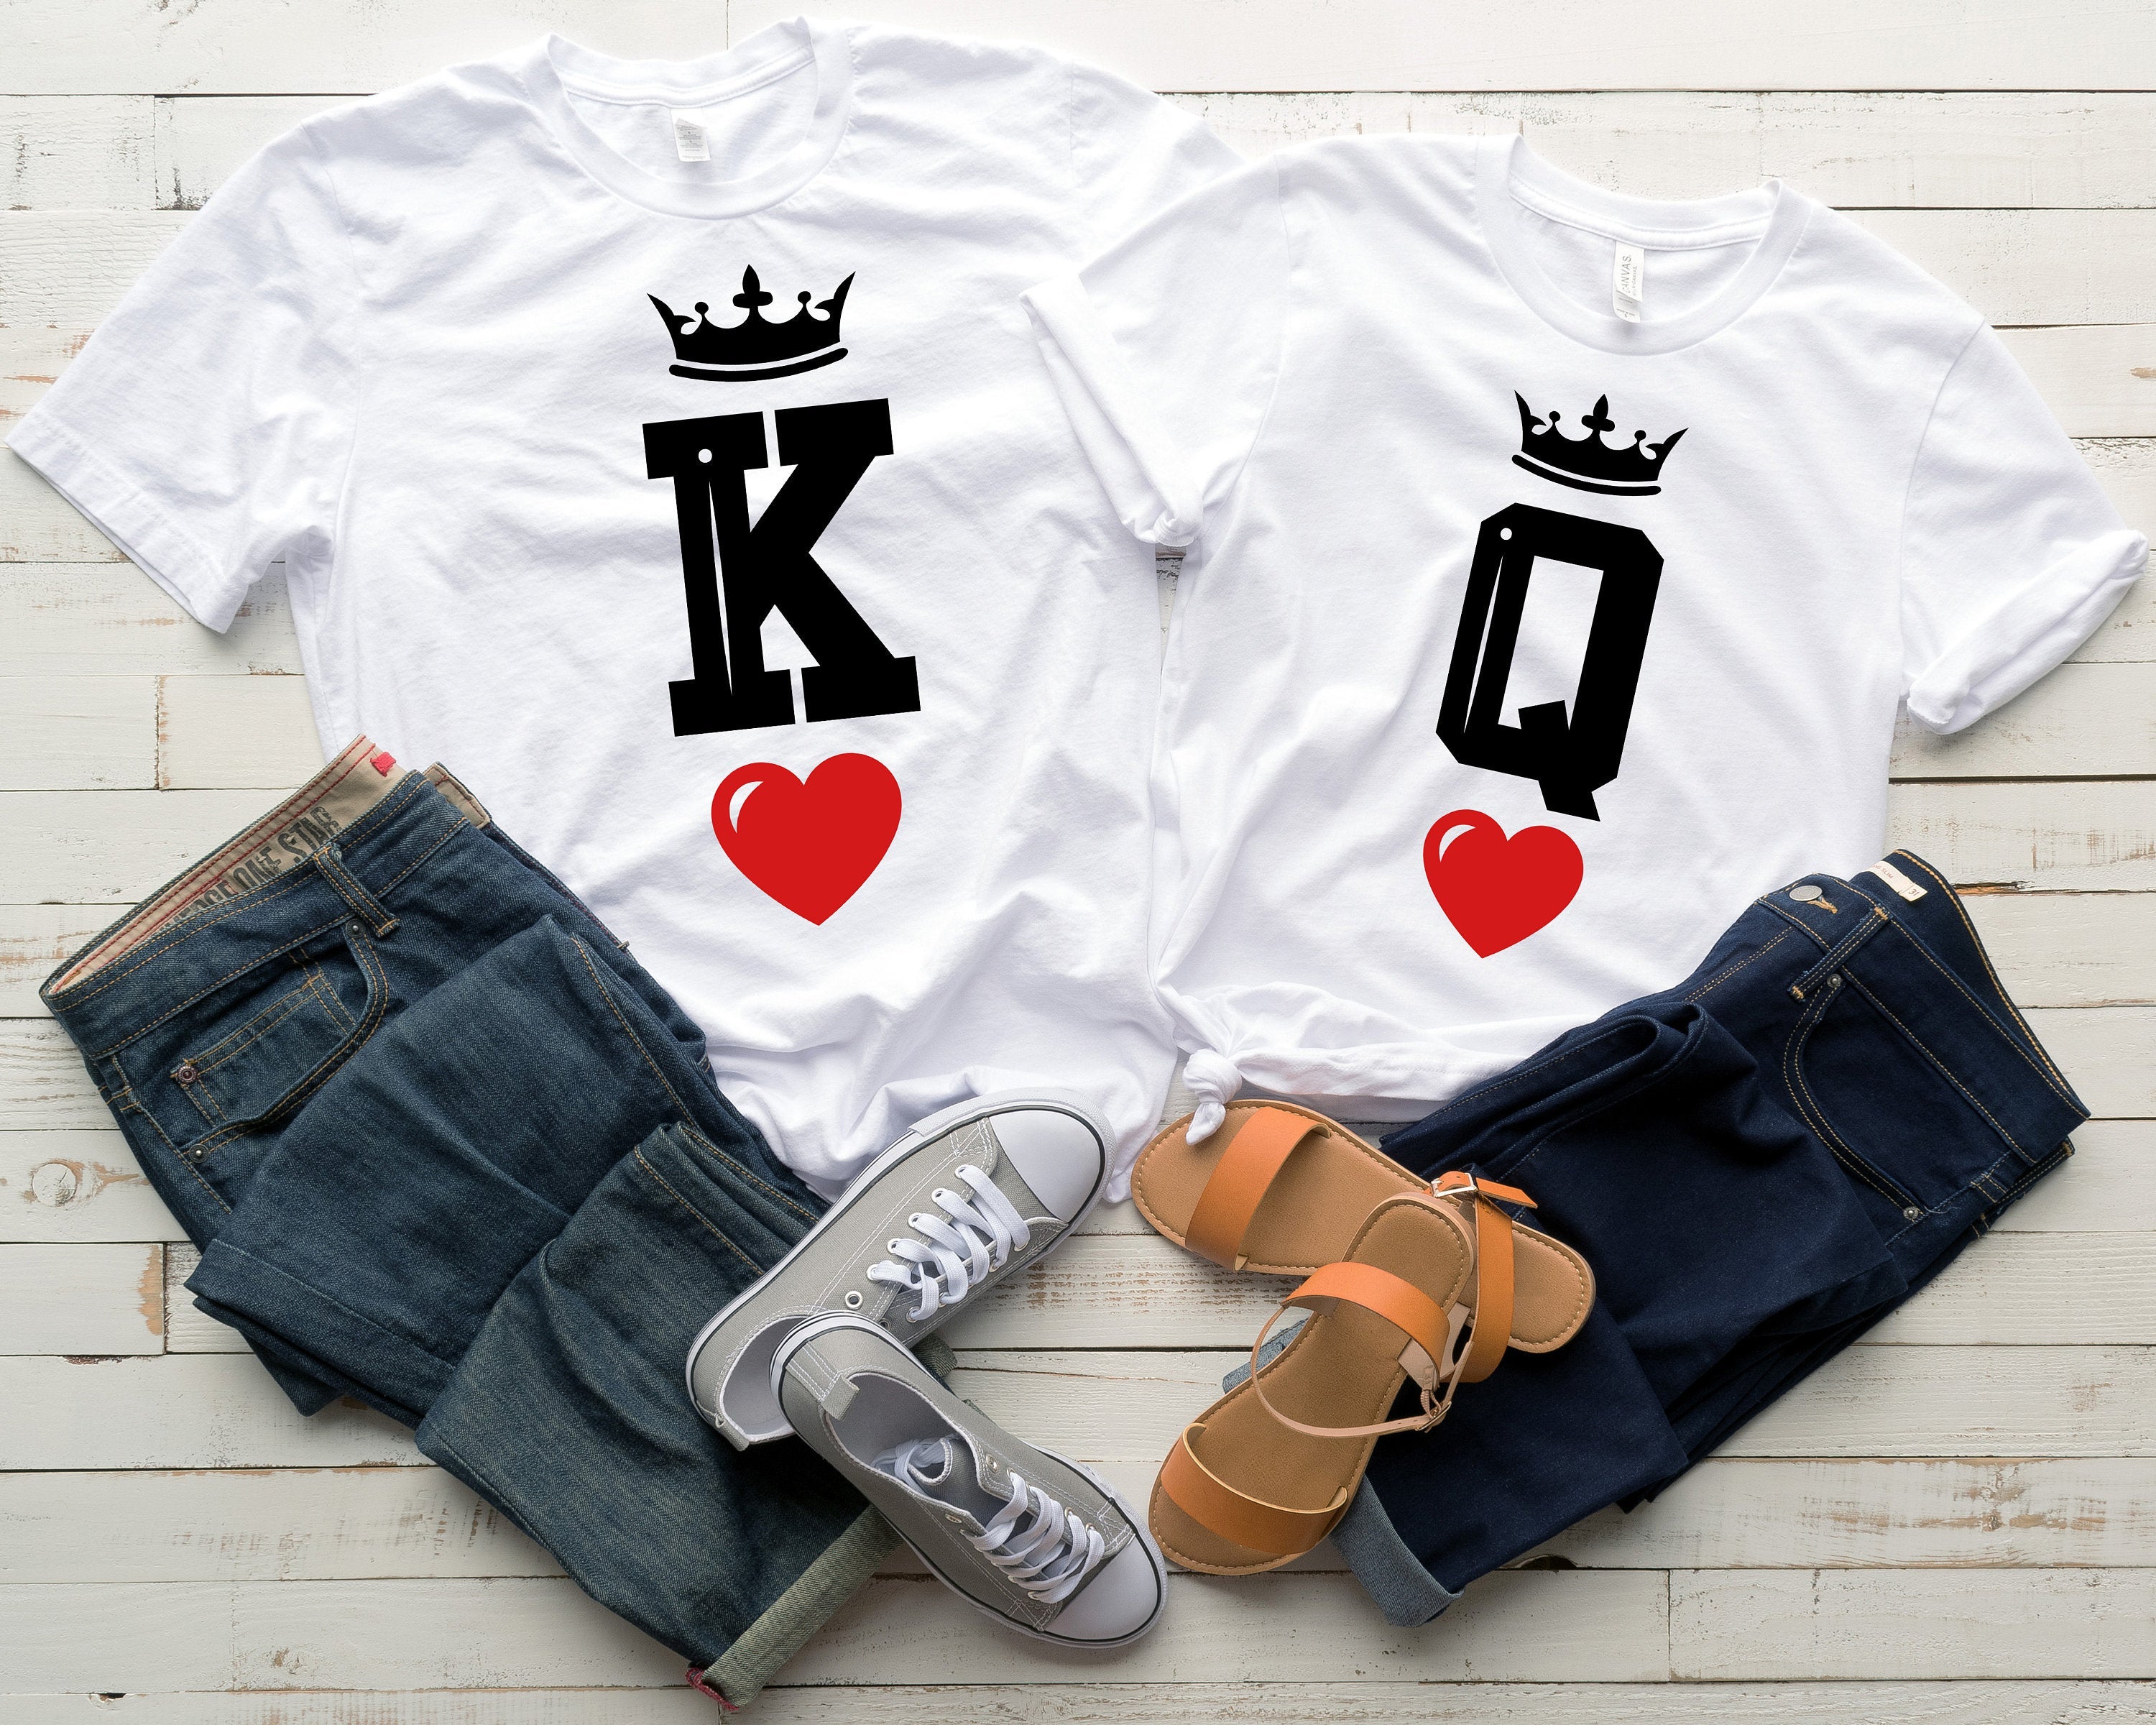 King / Queen of Heart Couple Shirts